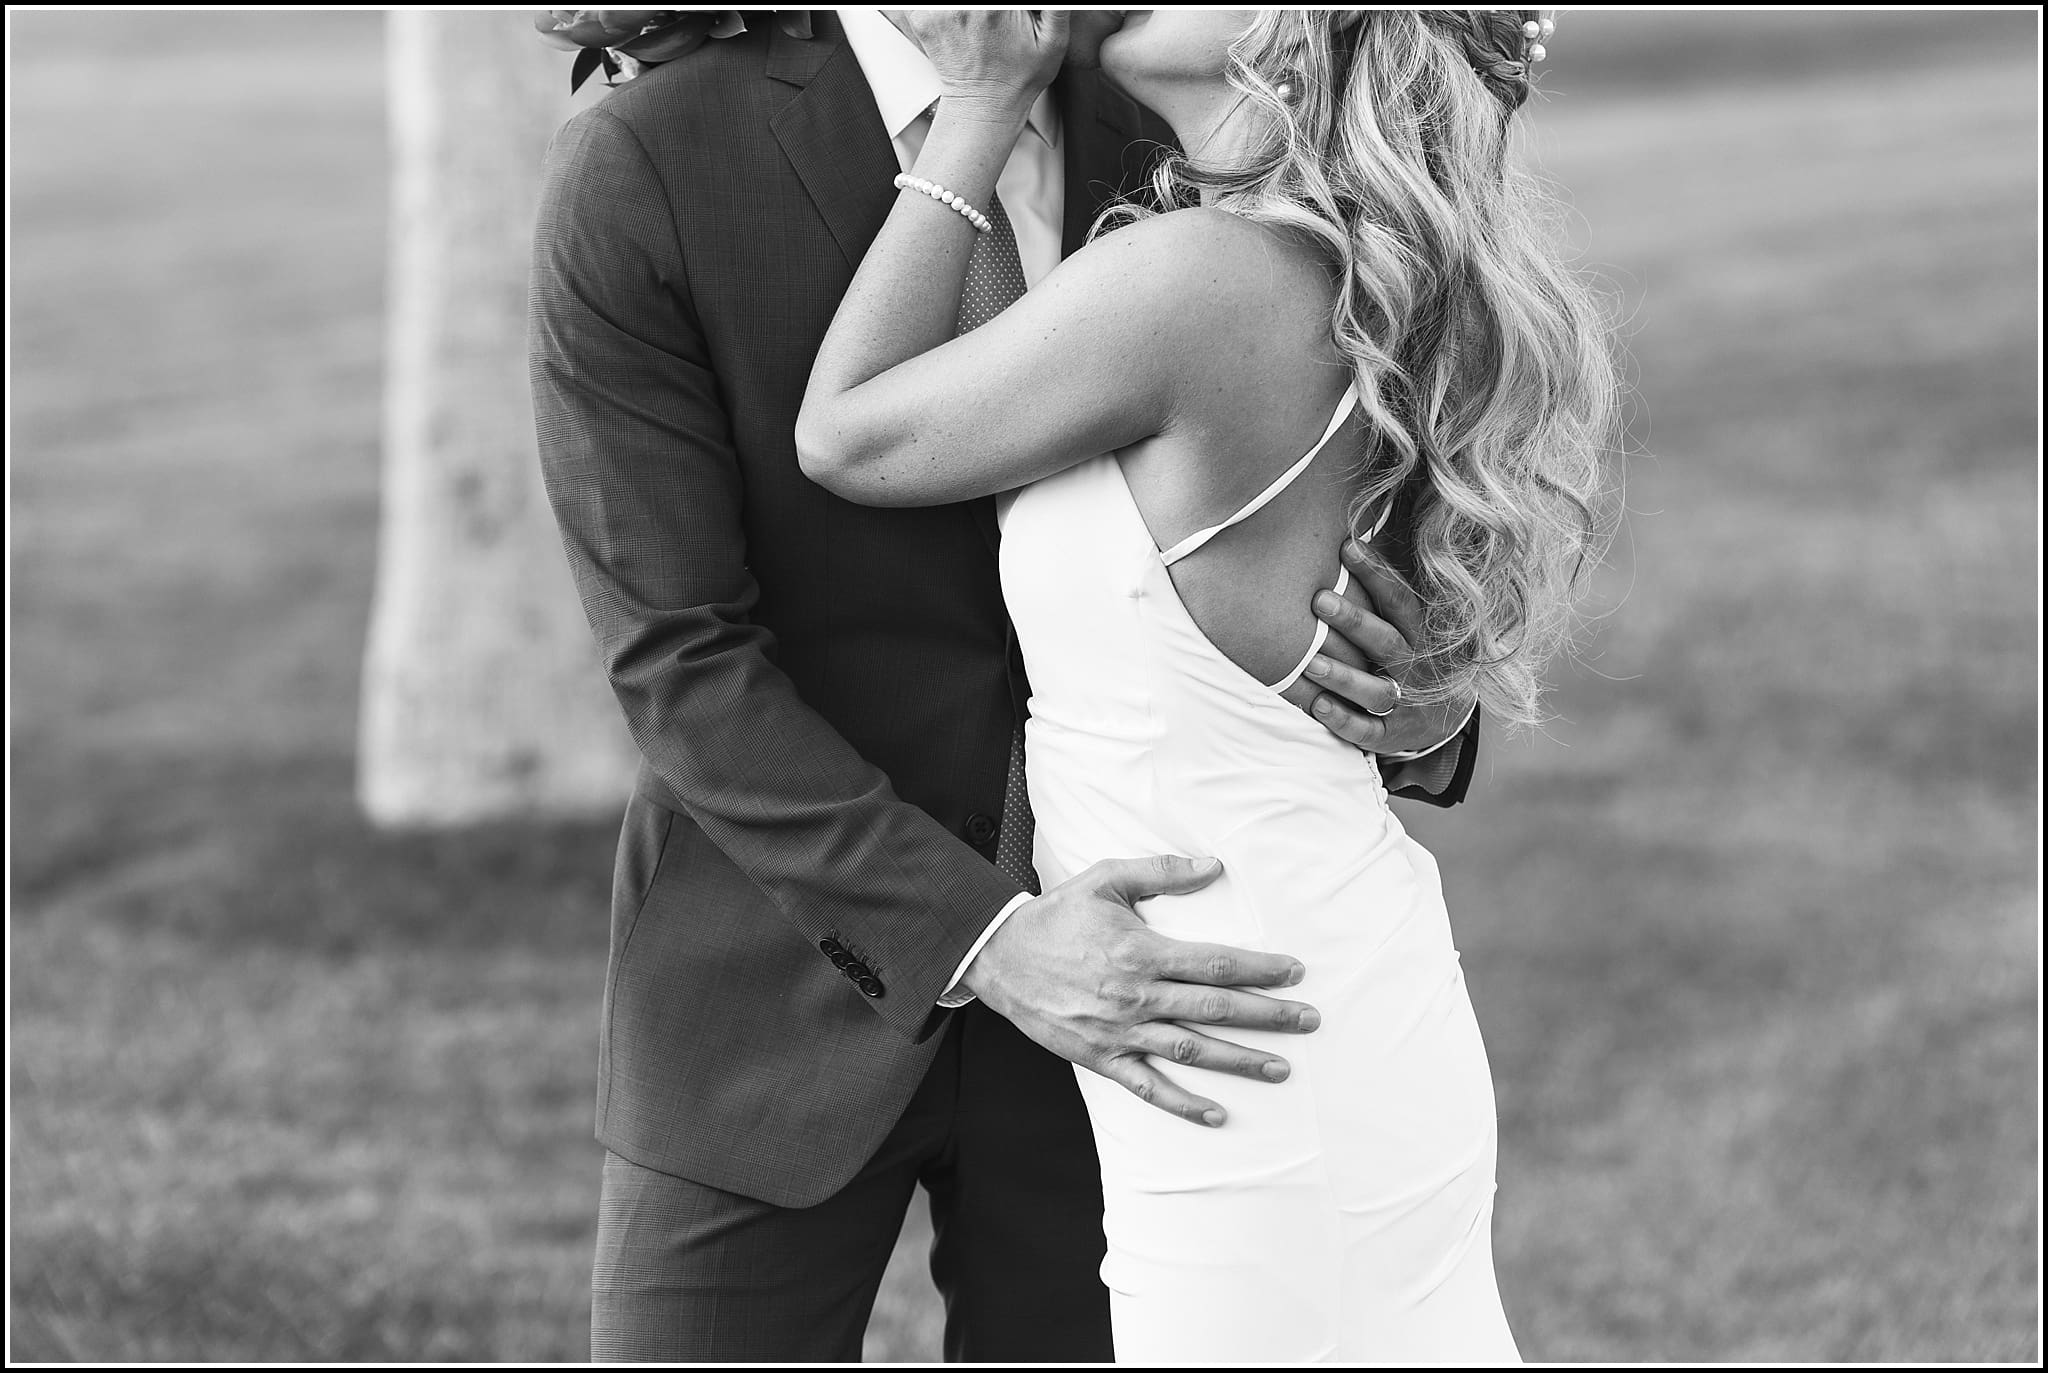  favorite wedding images 2016, wedding photos from 2016, our favorite wedding photos, backless wedding gown, black and white wedding portraits